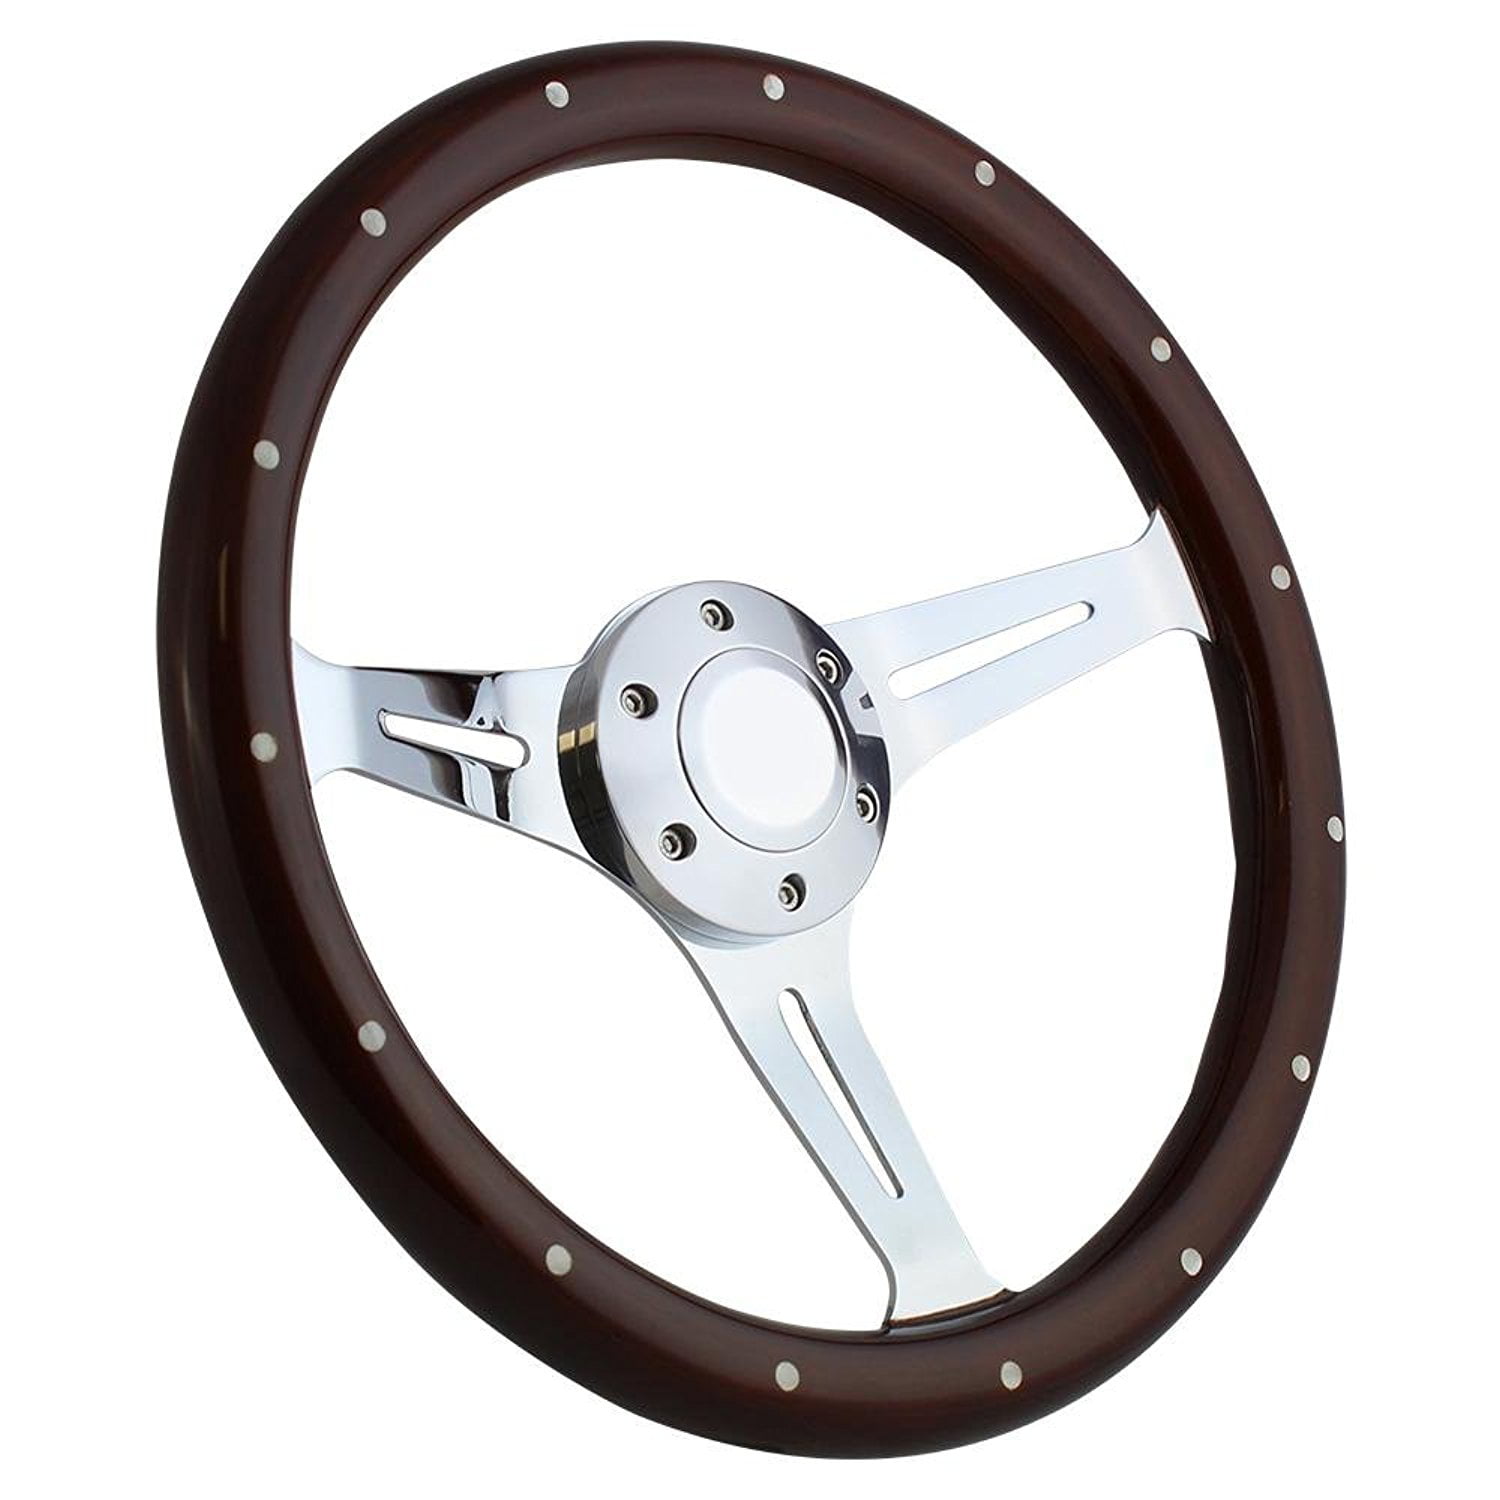 Chrome DNA MOTORING SW1504 380mm Stainless Steel Spokes Riveted Wood Grip Steering Wheel For Vehicles with Aftermarket 6-Bolt X 70mm Pattern Cherry Wood Grain